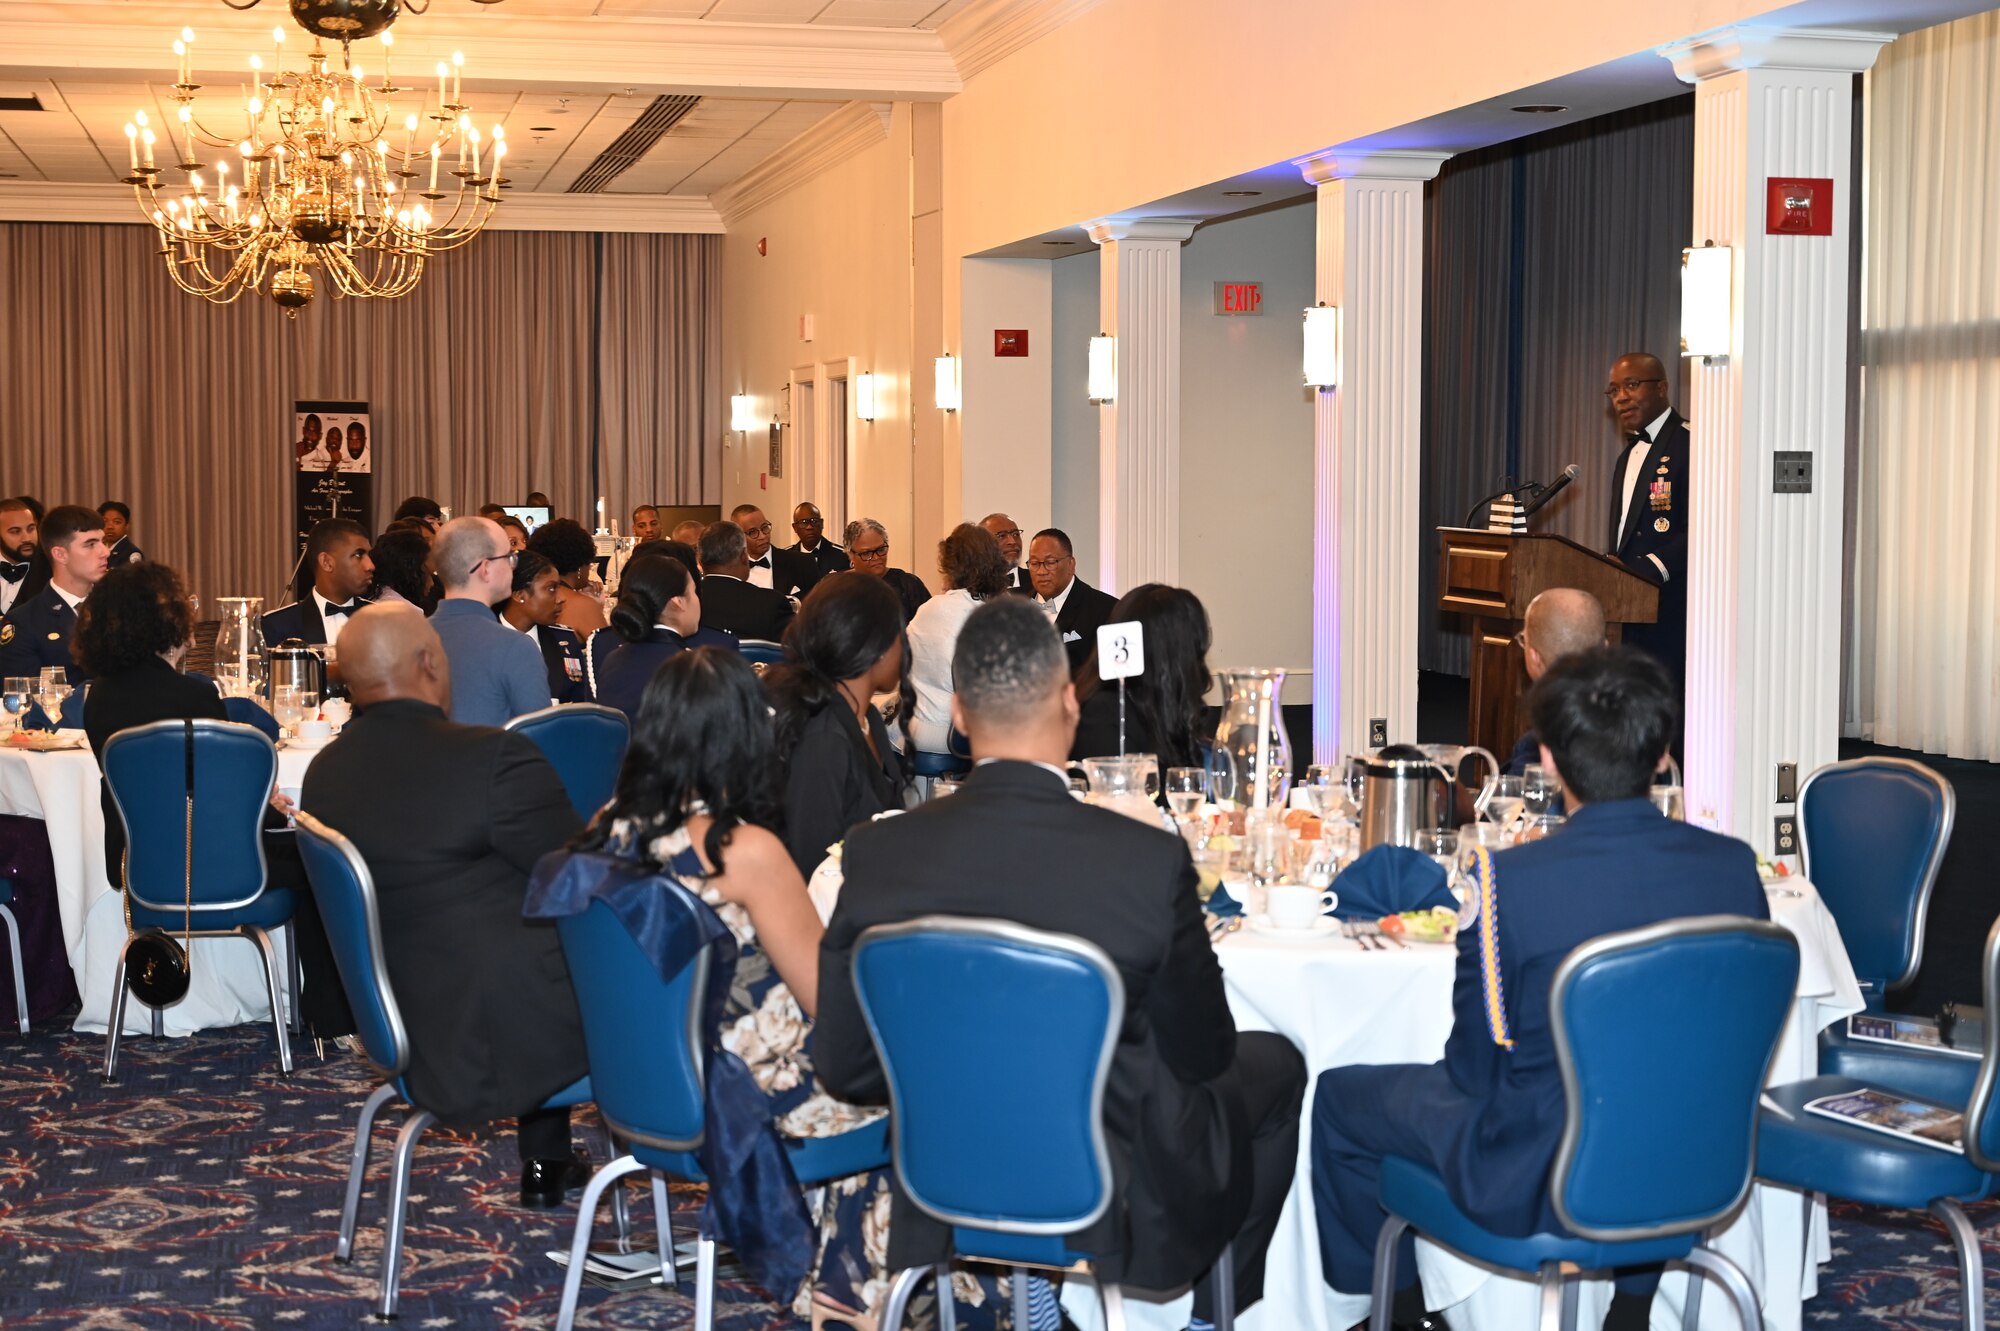 Lt. Gen. Stacy Hawkins, Air Force Sustainment Center Commander, gives the keynote speech at the 34th Annual Air Force Cadet Officer Mentor Association’s (AFCOMA) Anniversary Awards Gala to a room filled with ROTC cadets, AFCOMA members and alum, and their families on May 6, 2023, at Joint Base Anacostia-Bolling.